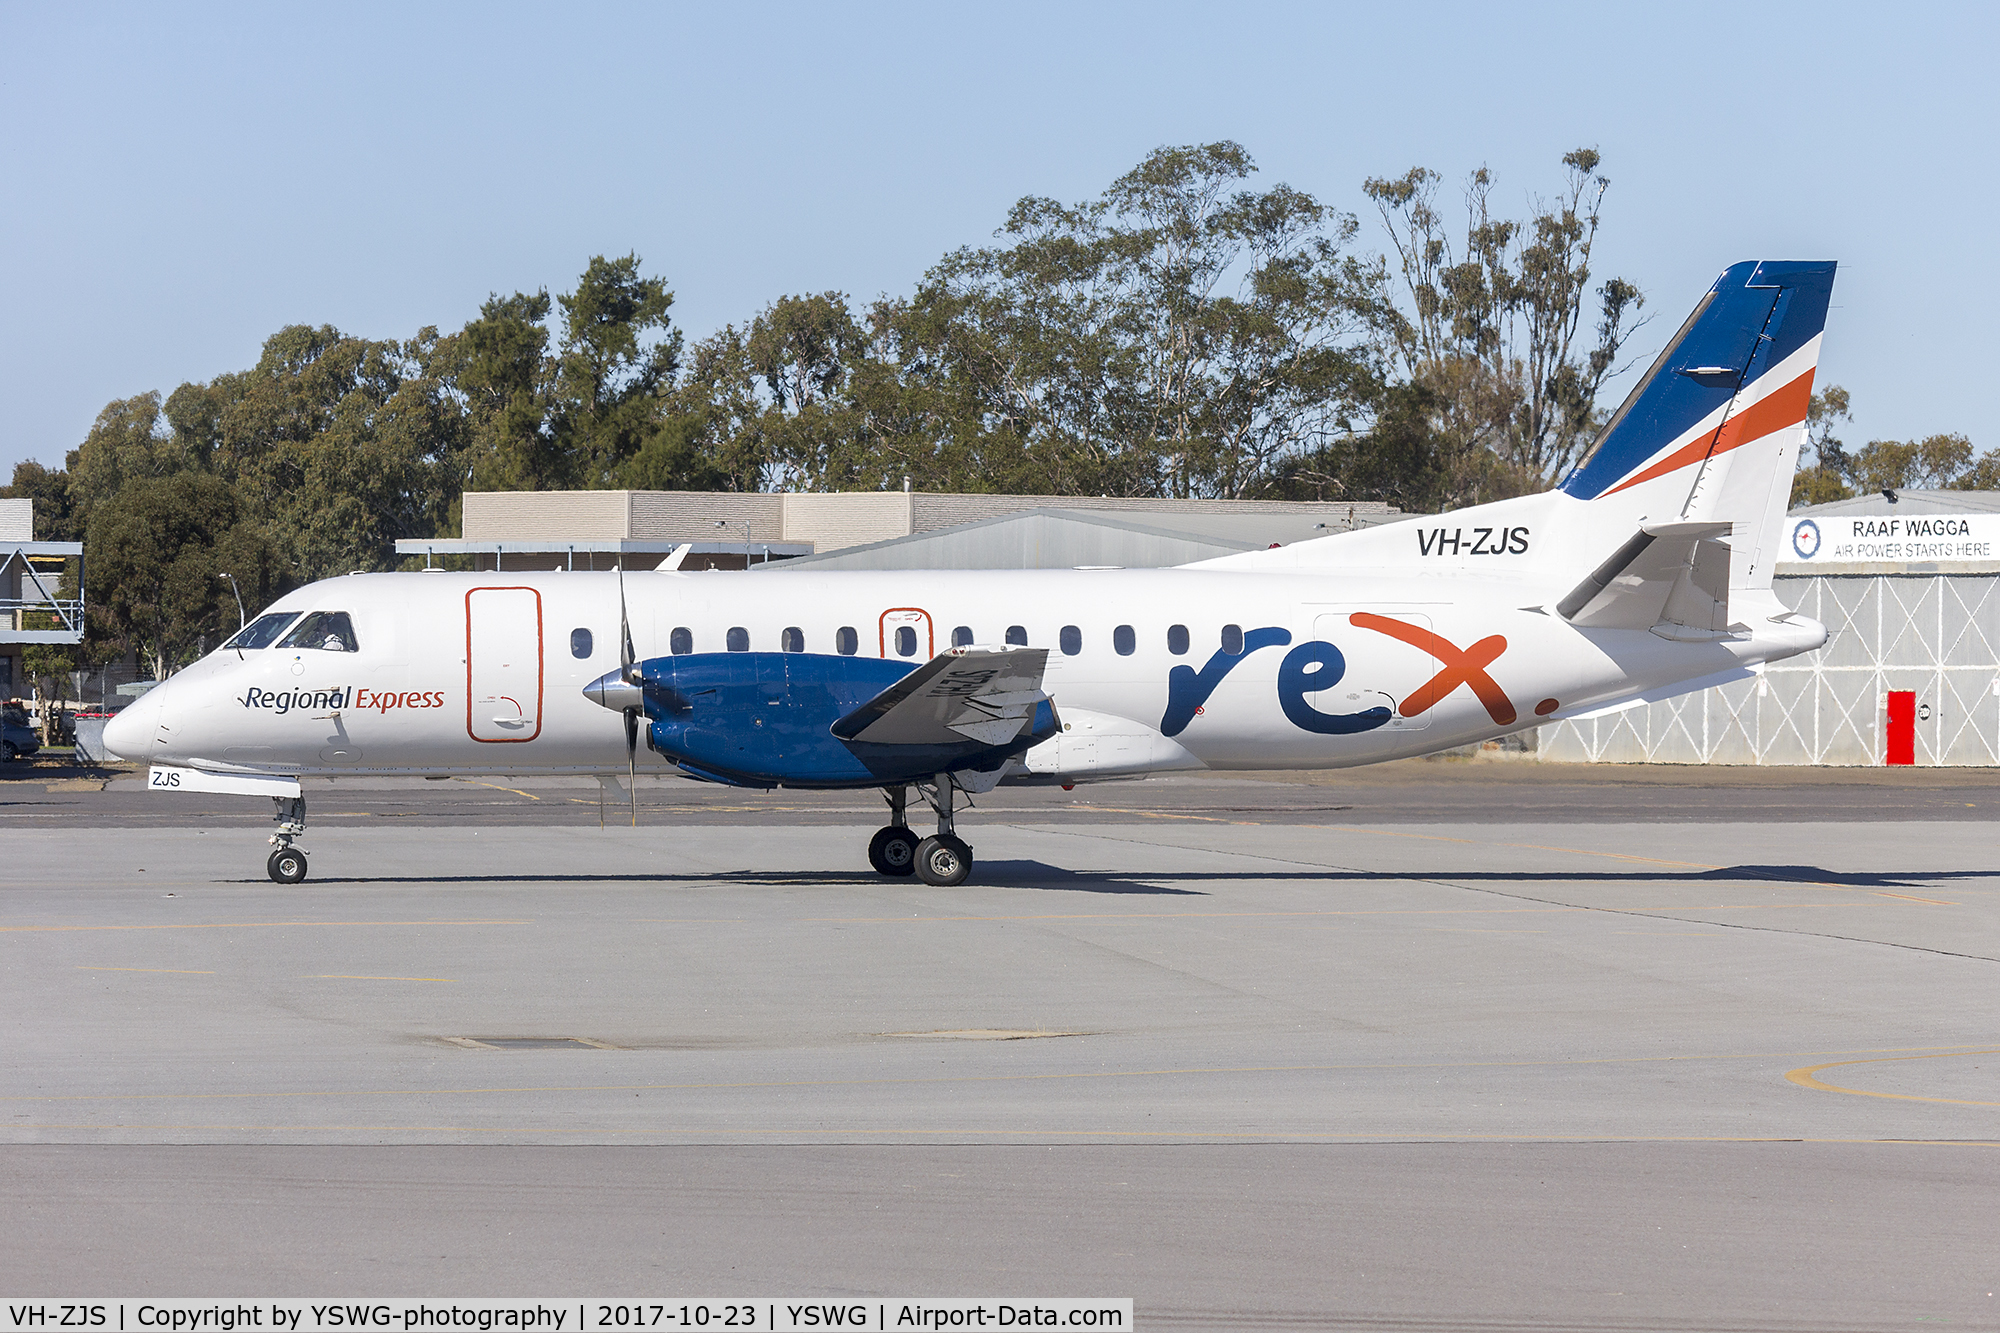 VH-ZJS, 1990 Saab 340B C/N 340B-186, Regional Express (VH-ZJS) Saab 340B, in the new revised livery, taxiing at Wagga Wagga